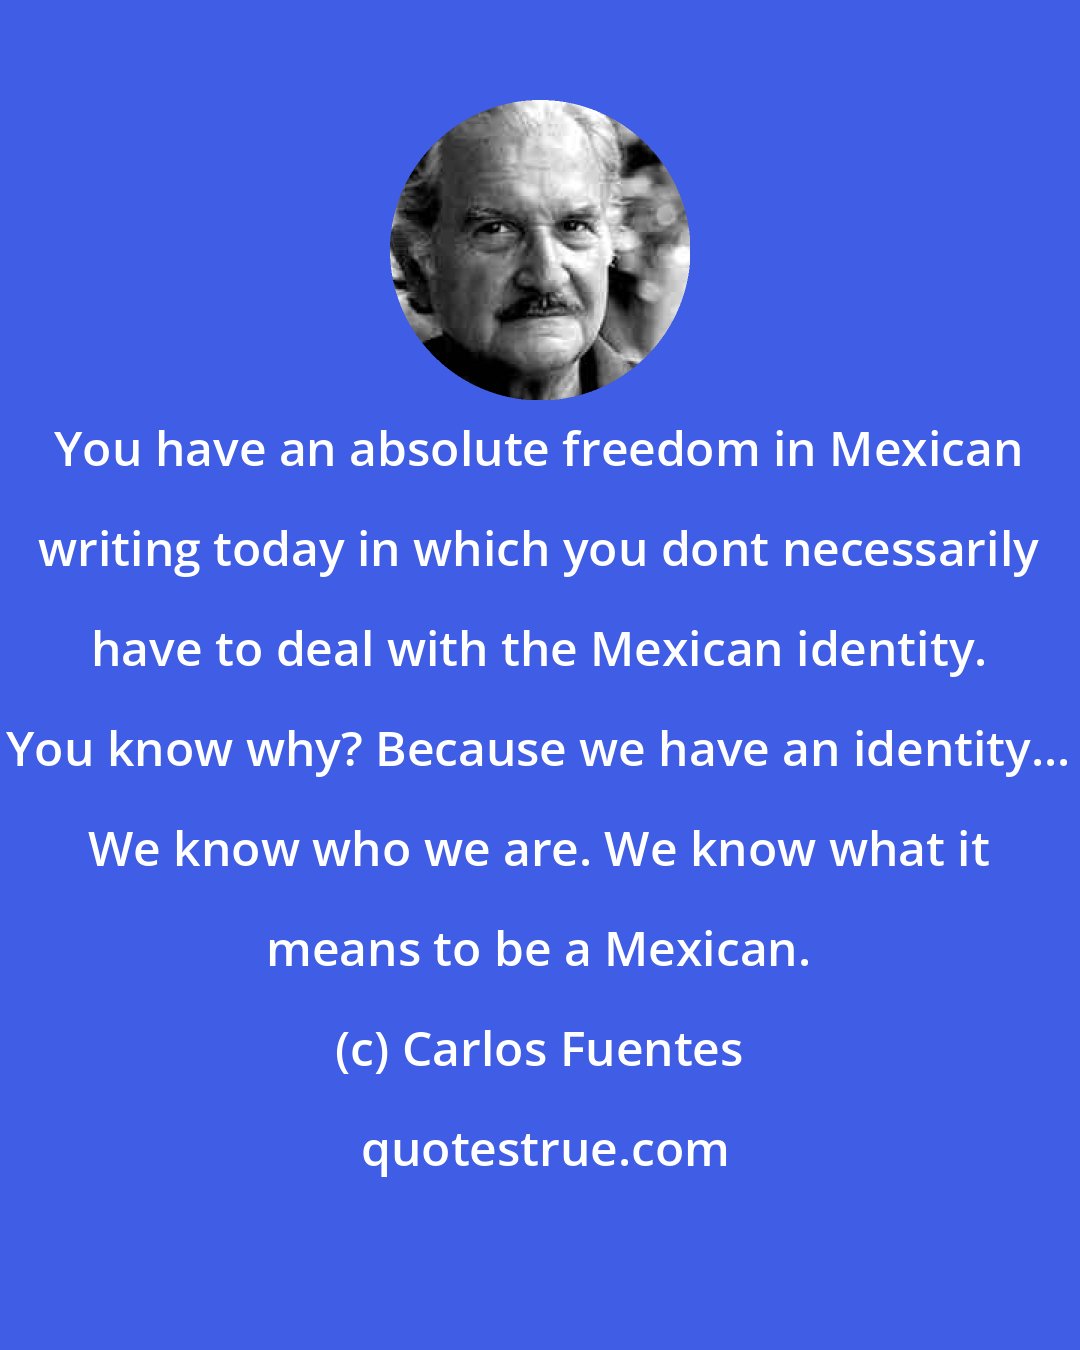 Carlos Fuentes: You have an absolute freedom in Mexican writing today in which you dont necessarily have to deal with the Mexican identity. You know why? Because we have an identity... We know who we are. We know what it means to be a Mexican.